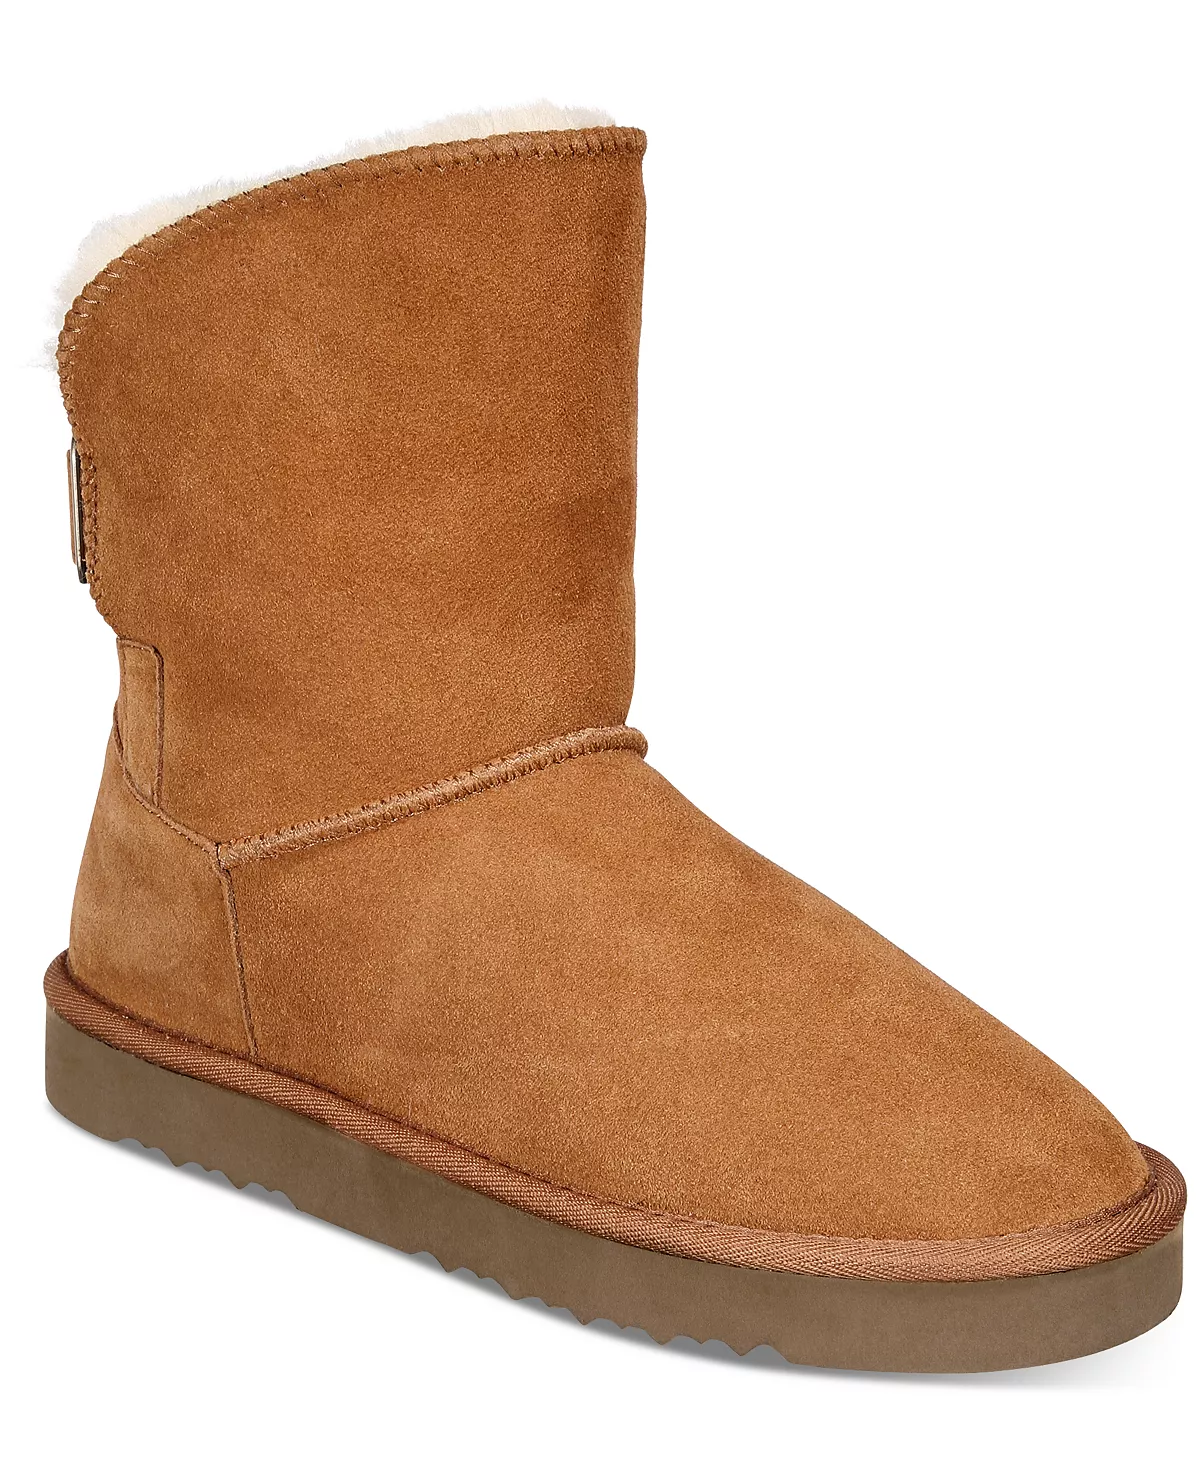 style & co boots on sale at macys